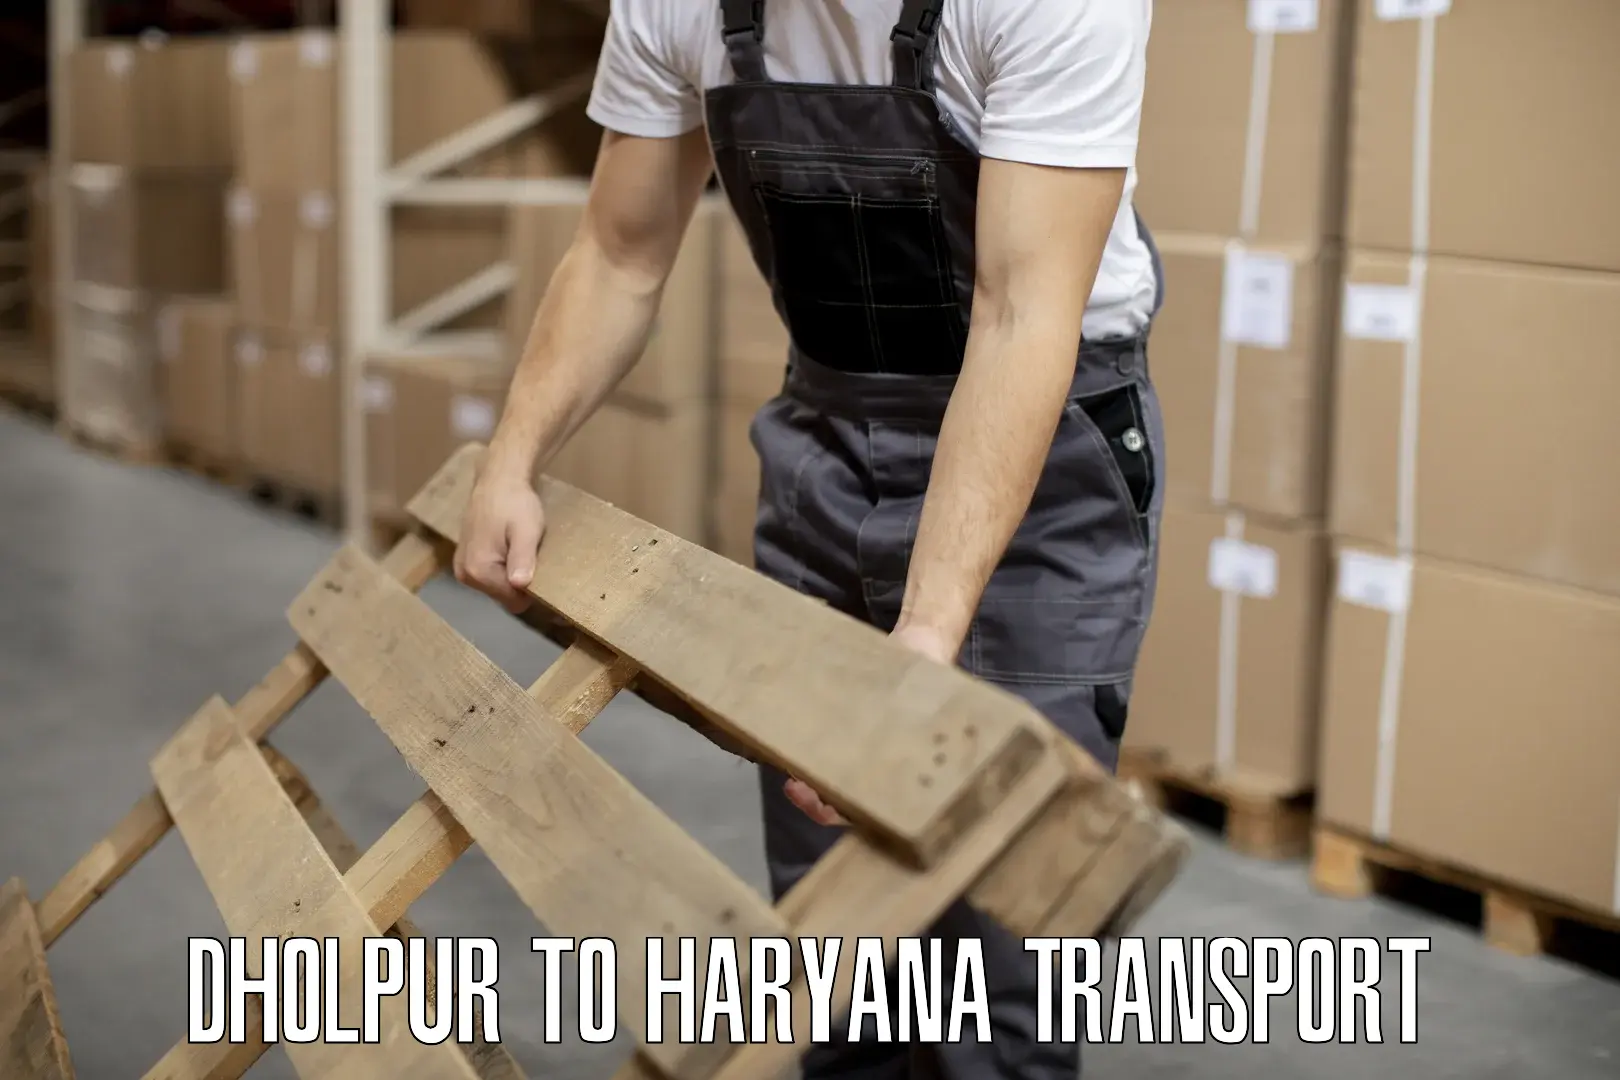 Container transport service Dholpur to Haryana